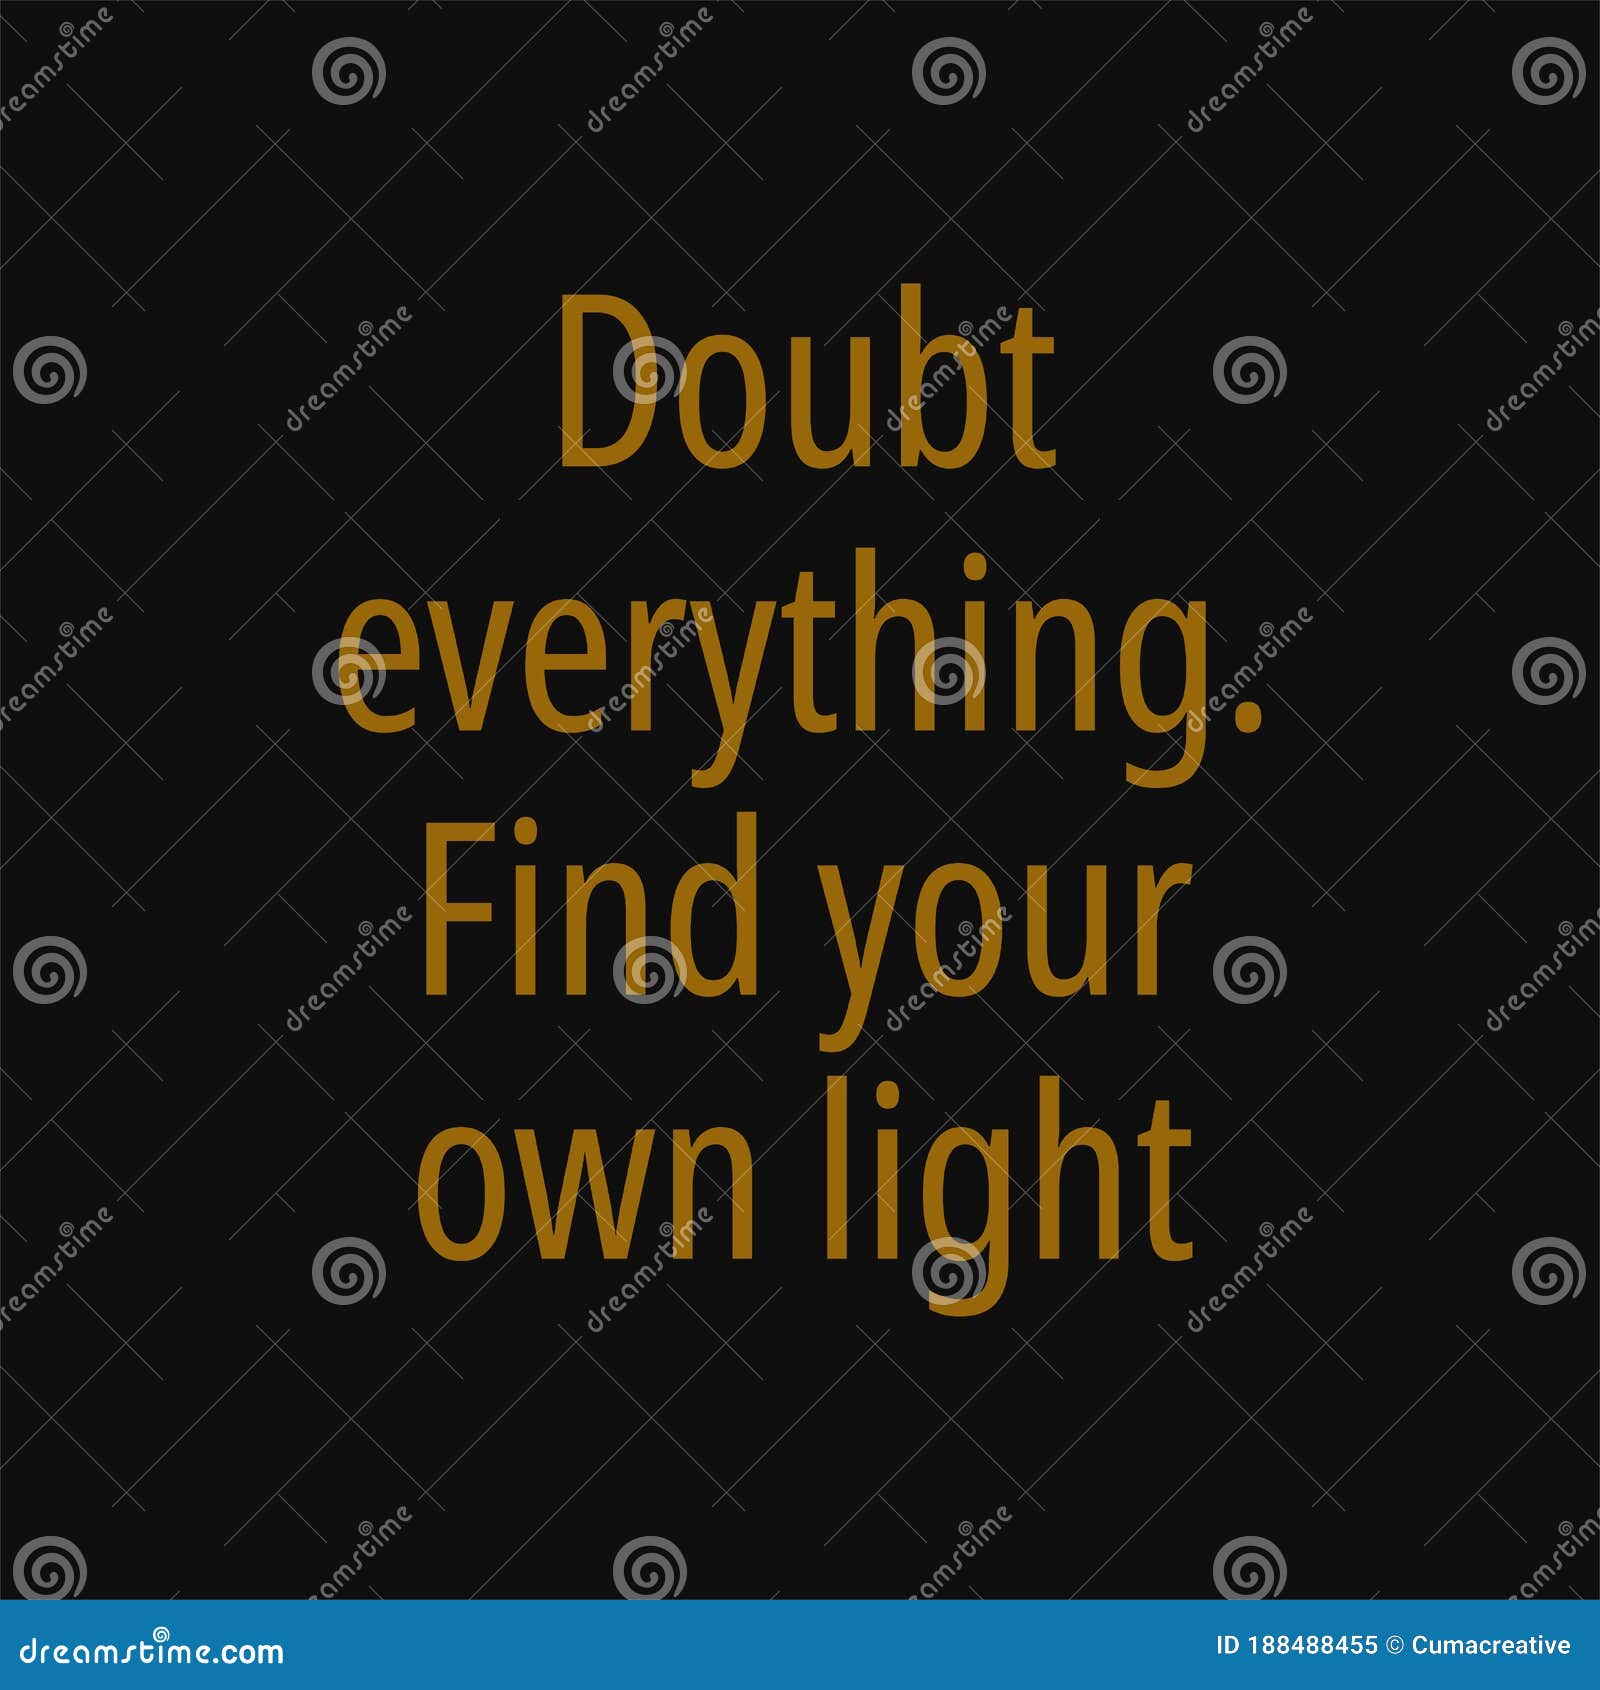 Doubt Everything Find Your Own Light Buddha Quotes On Life Stock Vector Illustration Of Positive Buddhism